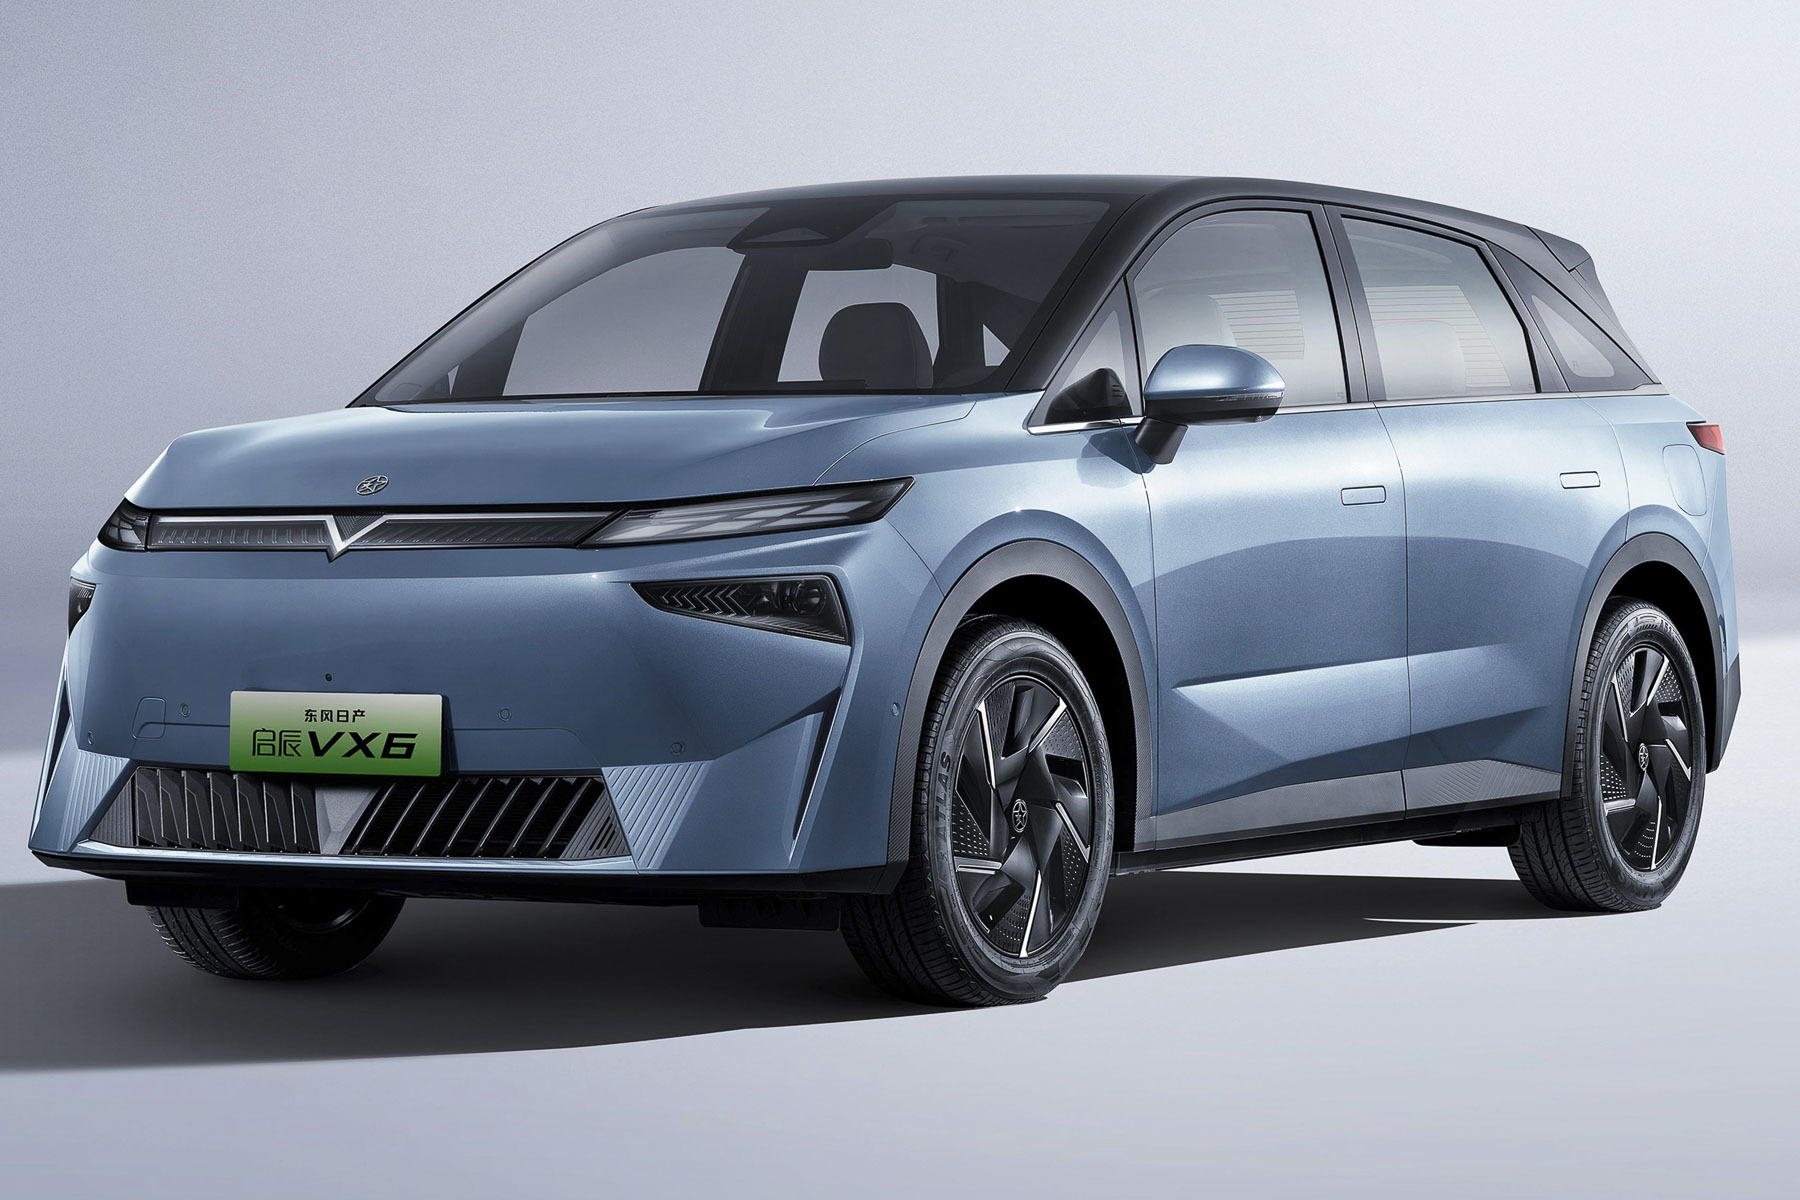 Nissan and Dongfeng have developed a new electric crossover